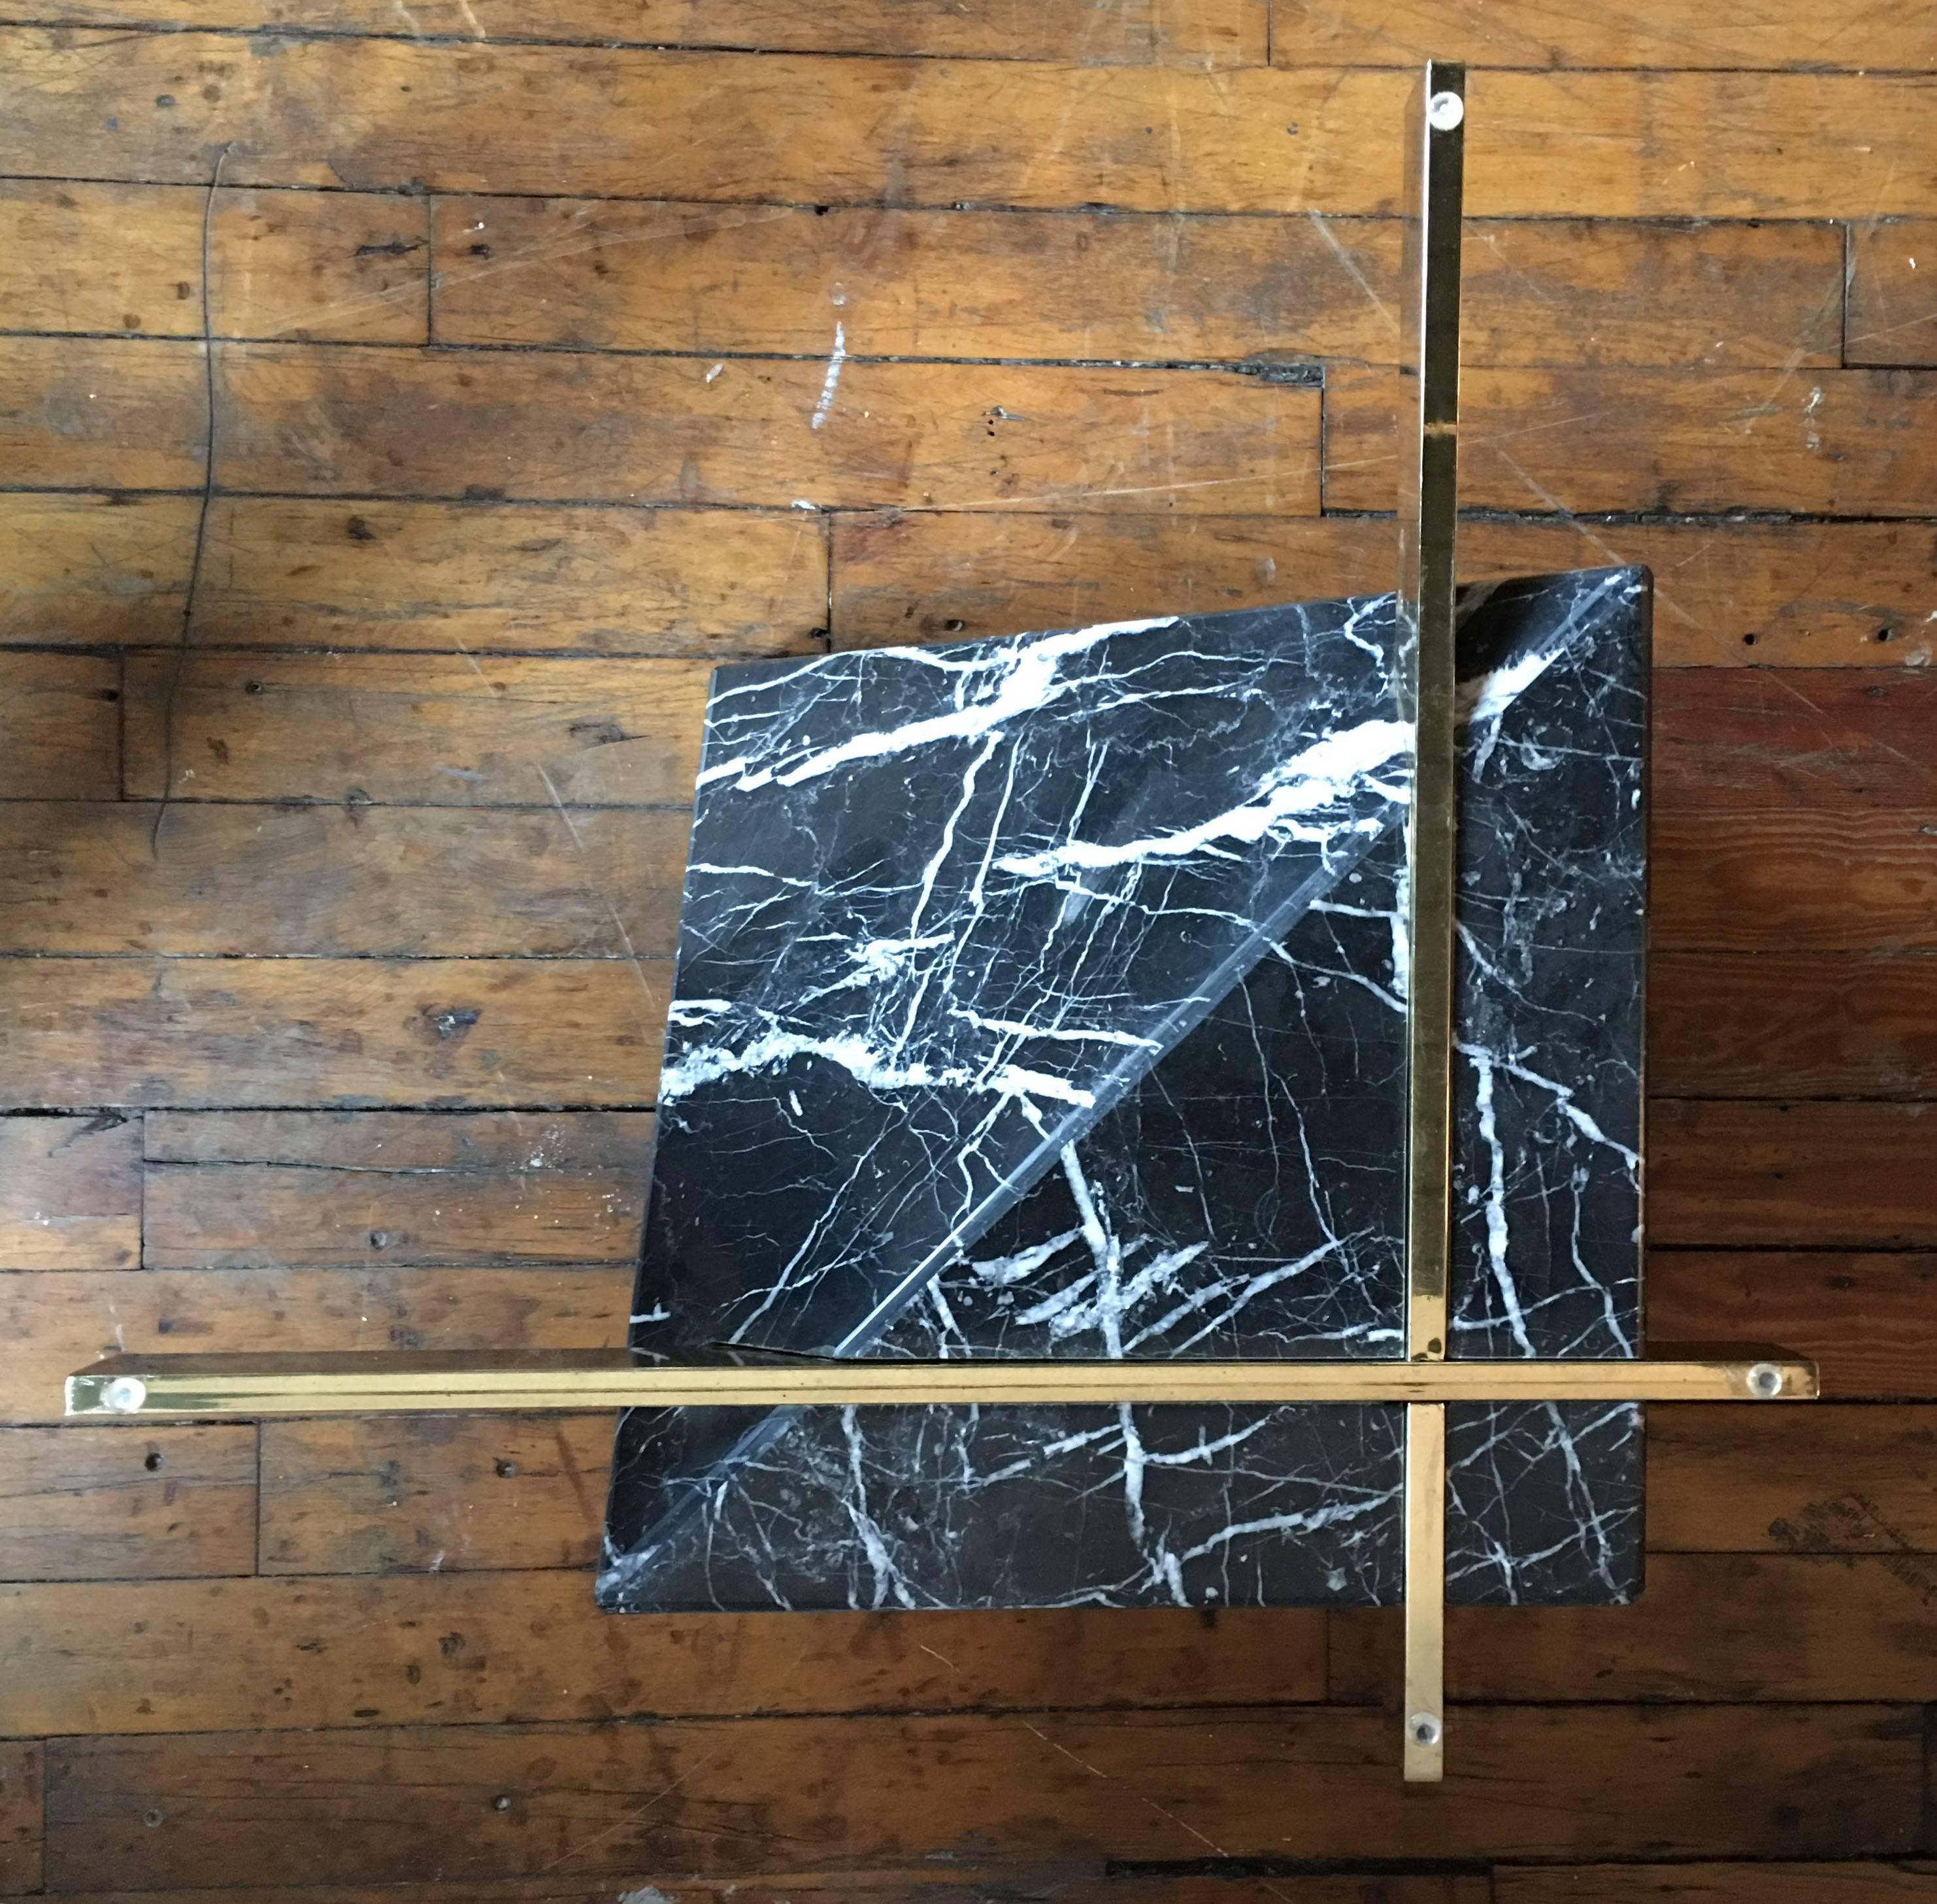 Mid-Century Modern Italian Marquina black and white marble cocktail table base attributed to Artedi.  Design features a cruciform polished brass plated support affixed to an angular geometric form marble base.  

Glass top not included.    
Original